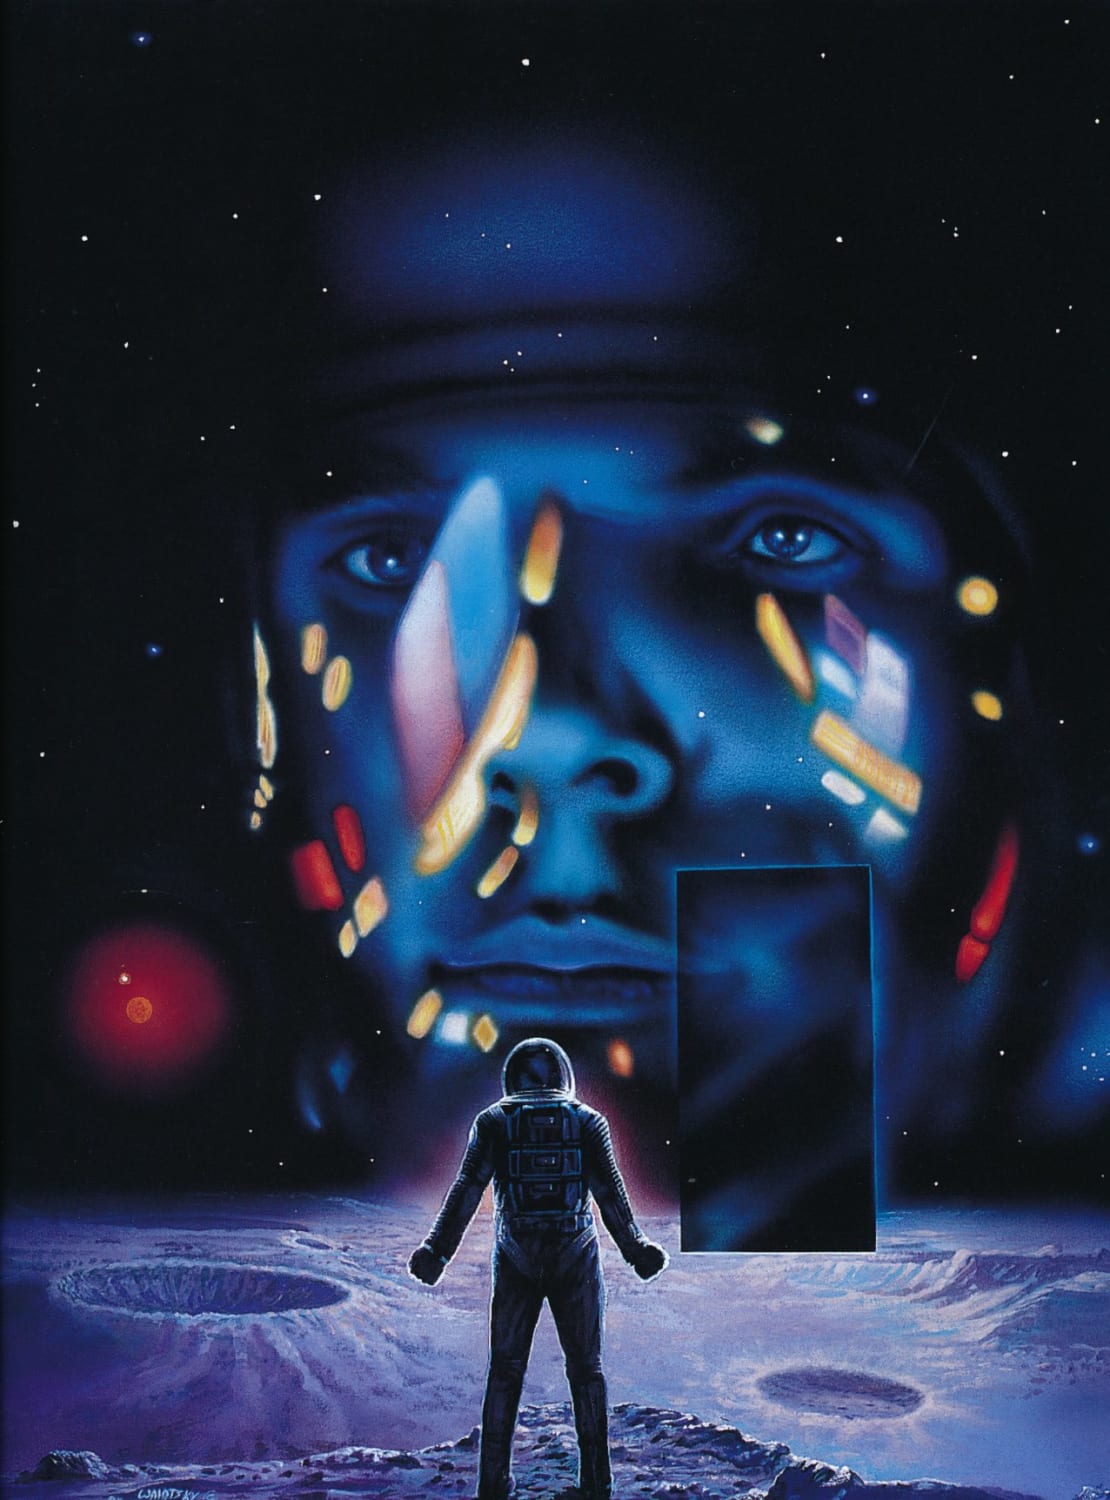 Painting by Ron Walotsky for the 1993 25th anniversary of Arthur C Clarke’s 2001 A Space Odyssey. From the book Infinite Worlds by Vincent Di Fate (1997)